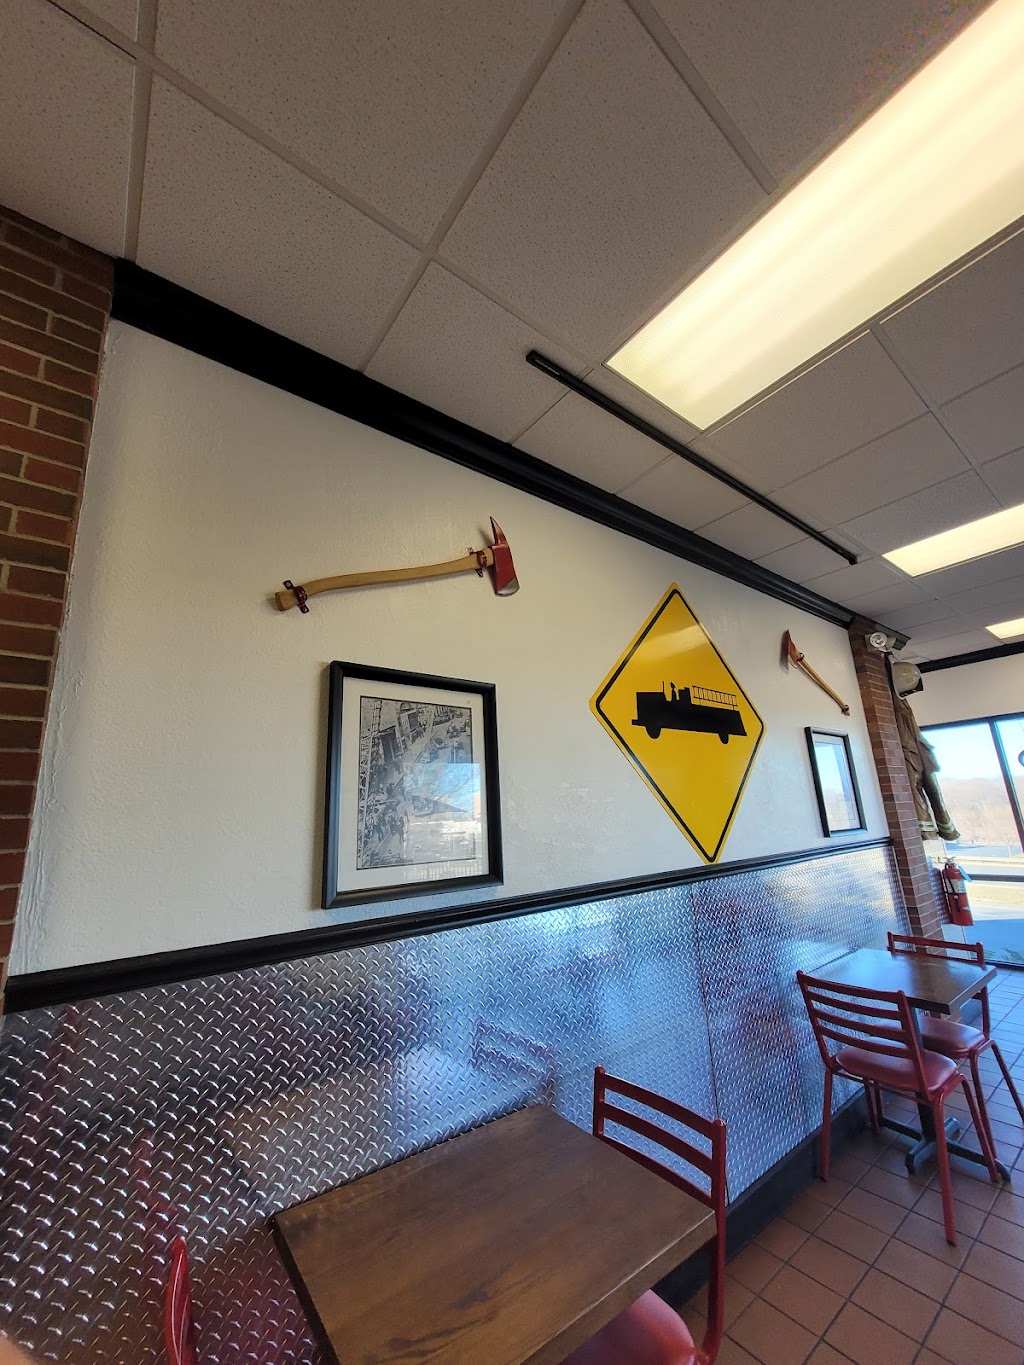 Firehouse Subs Speedway Blvd | 7712 Sossamon Ln NW Ste 100, Concord, NC 28027 | Phone: (704) 979-3737